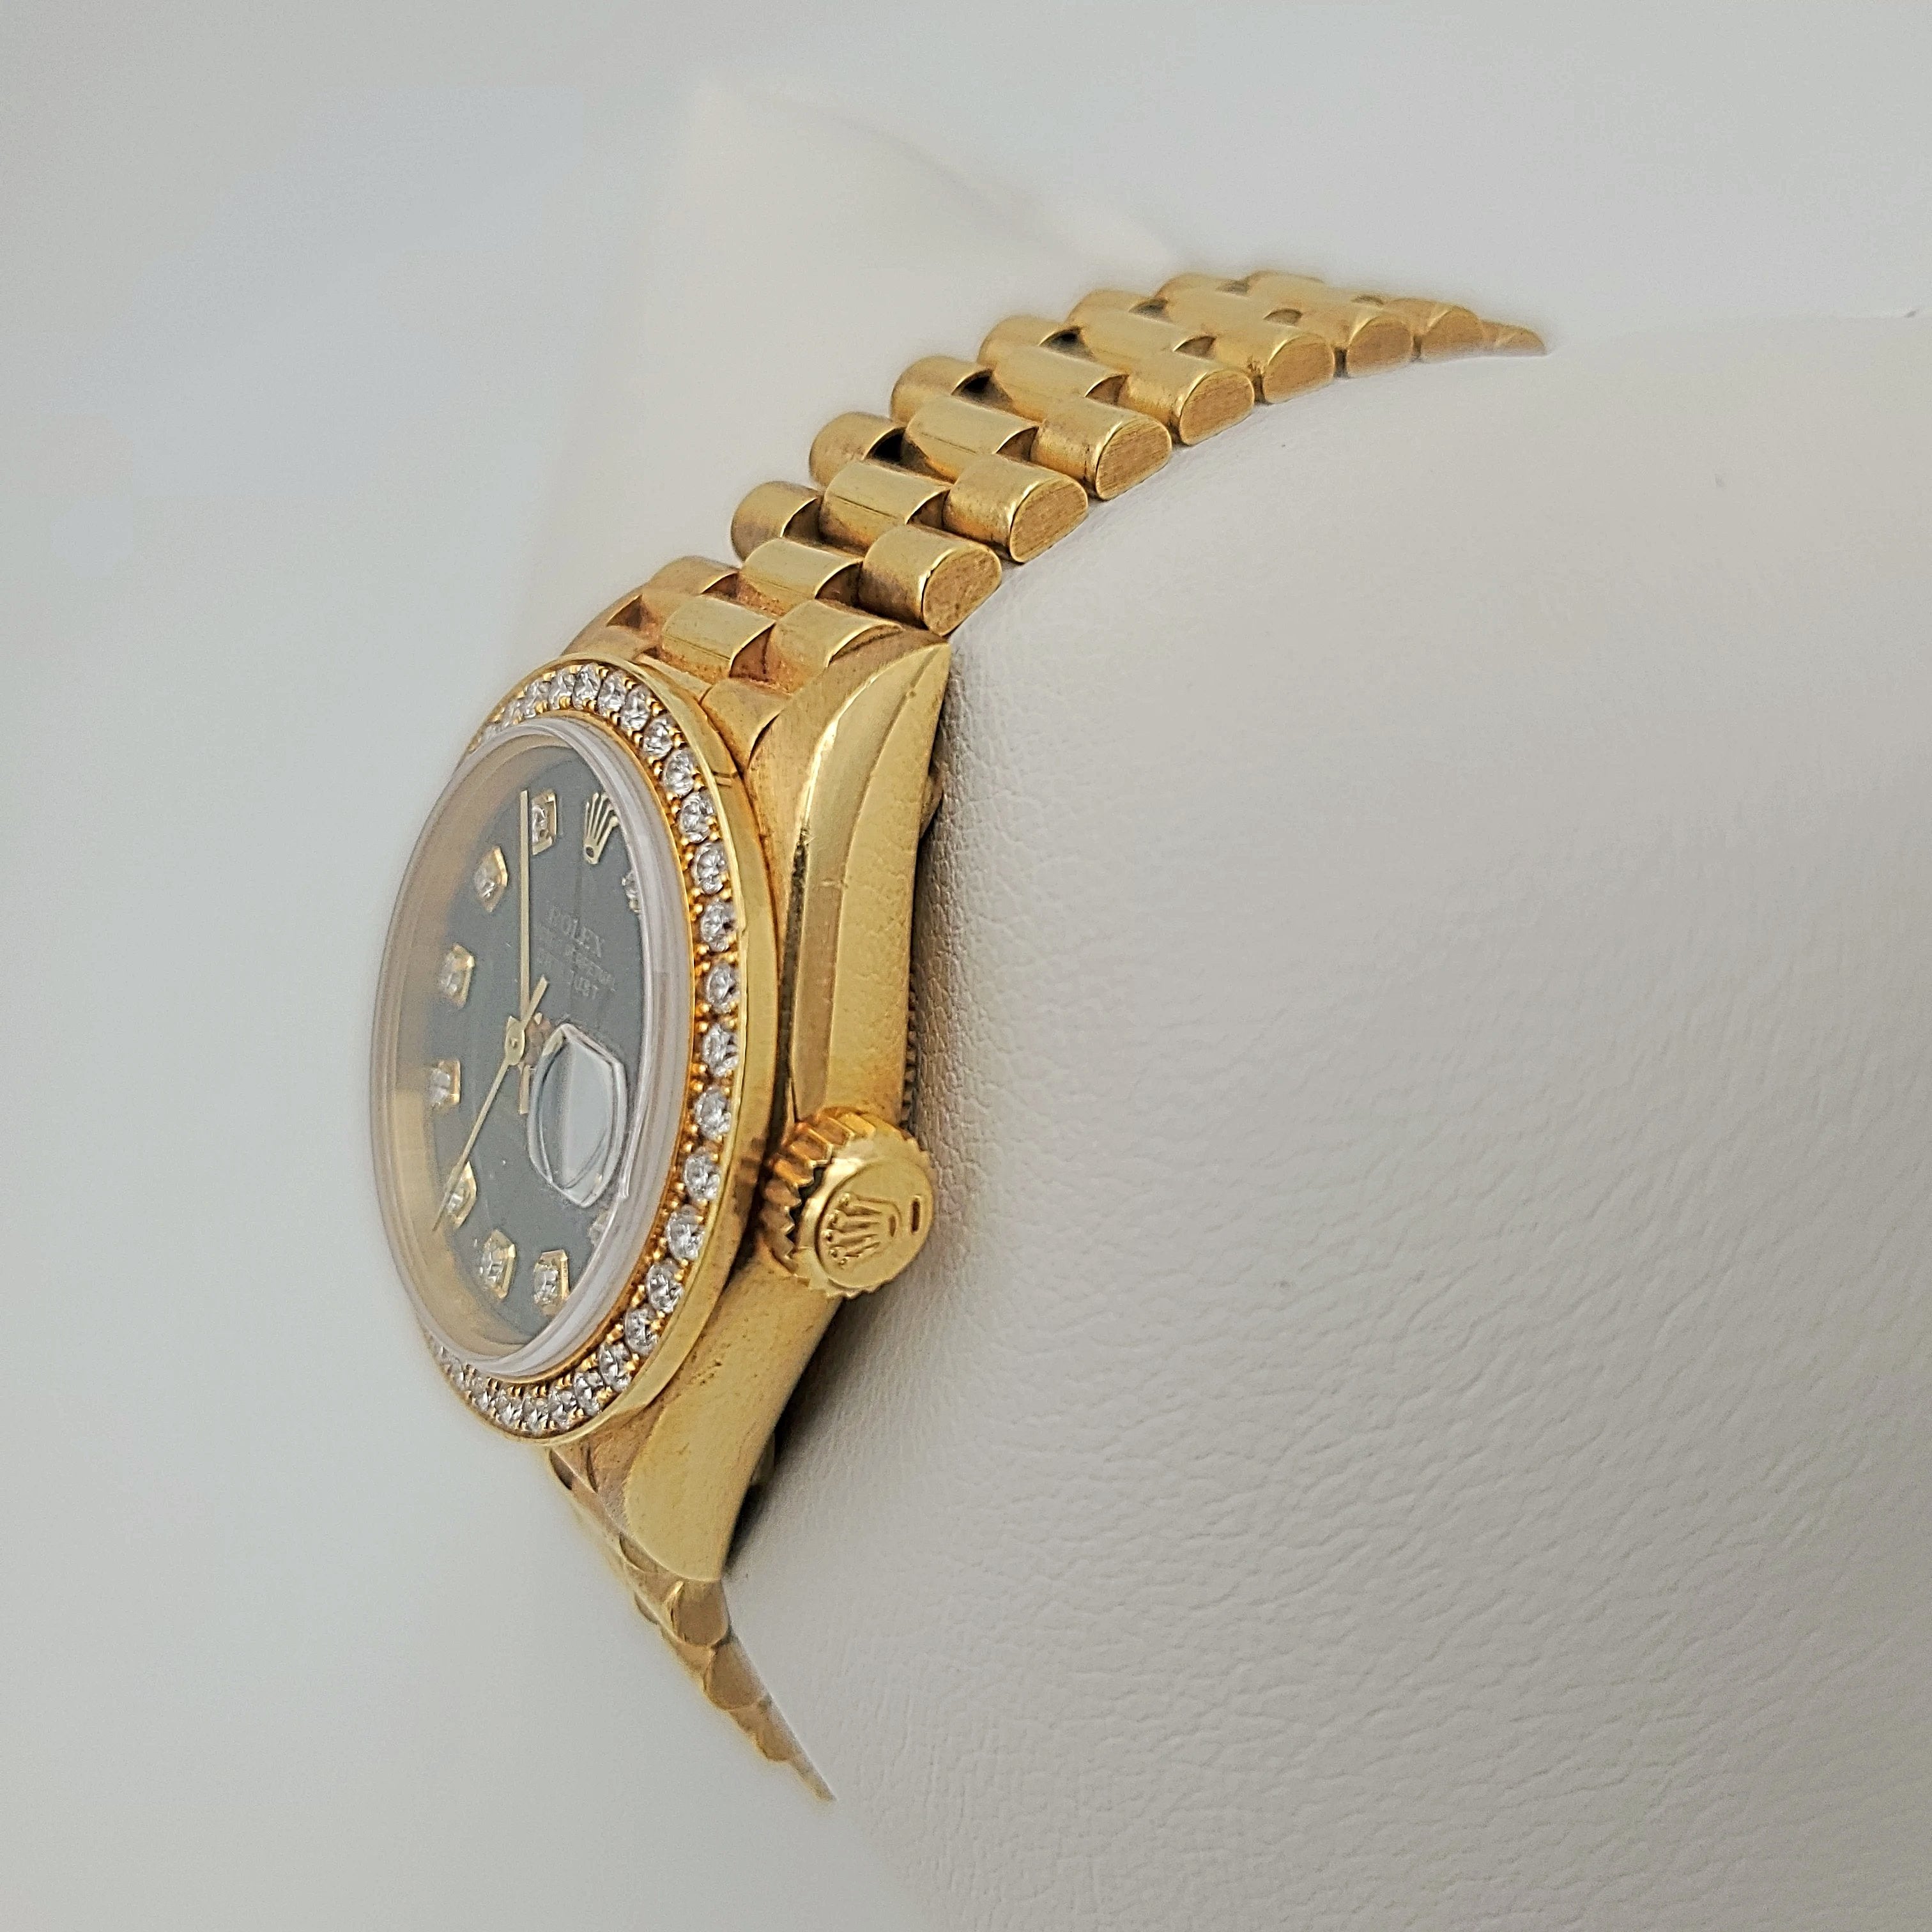 Women's Rolex 26mm Presidential 18K Yellow Gold Watch with Black Diamond Dial and Diamond Bezel. (Pre-Owned)